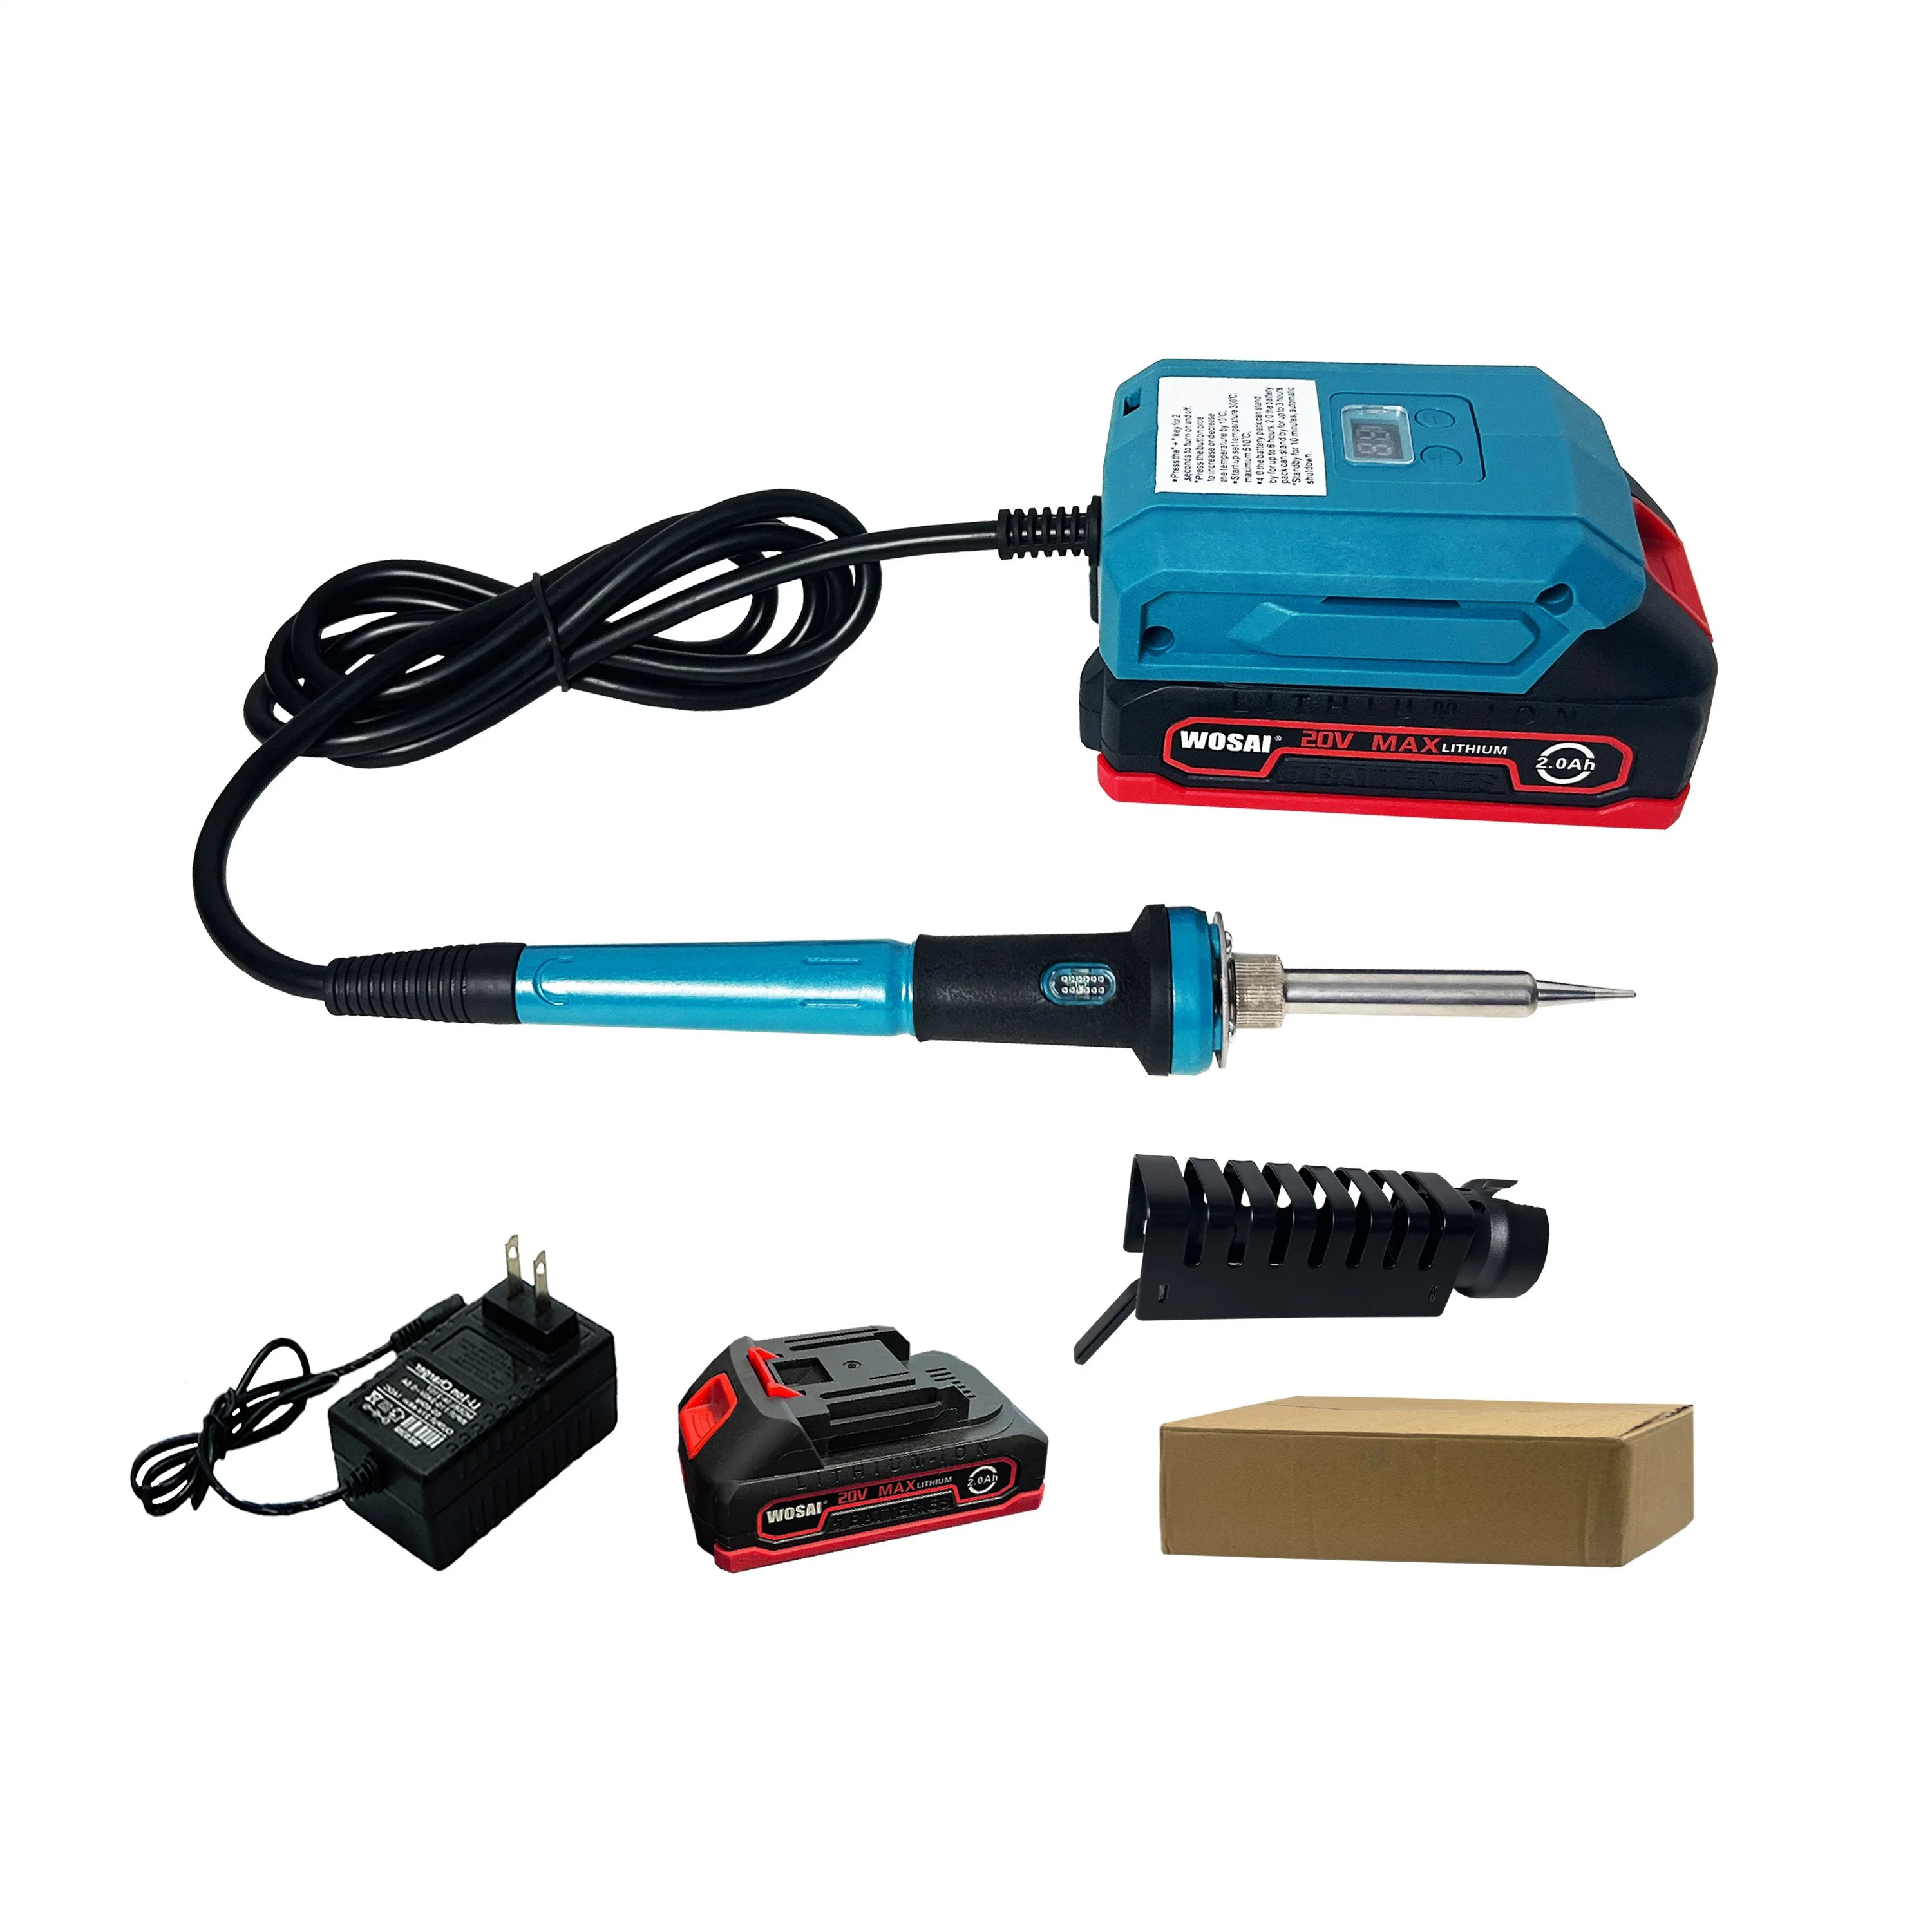 Wosai Precision Technology Production 60W Soldering Station Hot Electric Solder Iron Gun